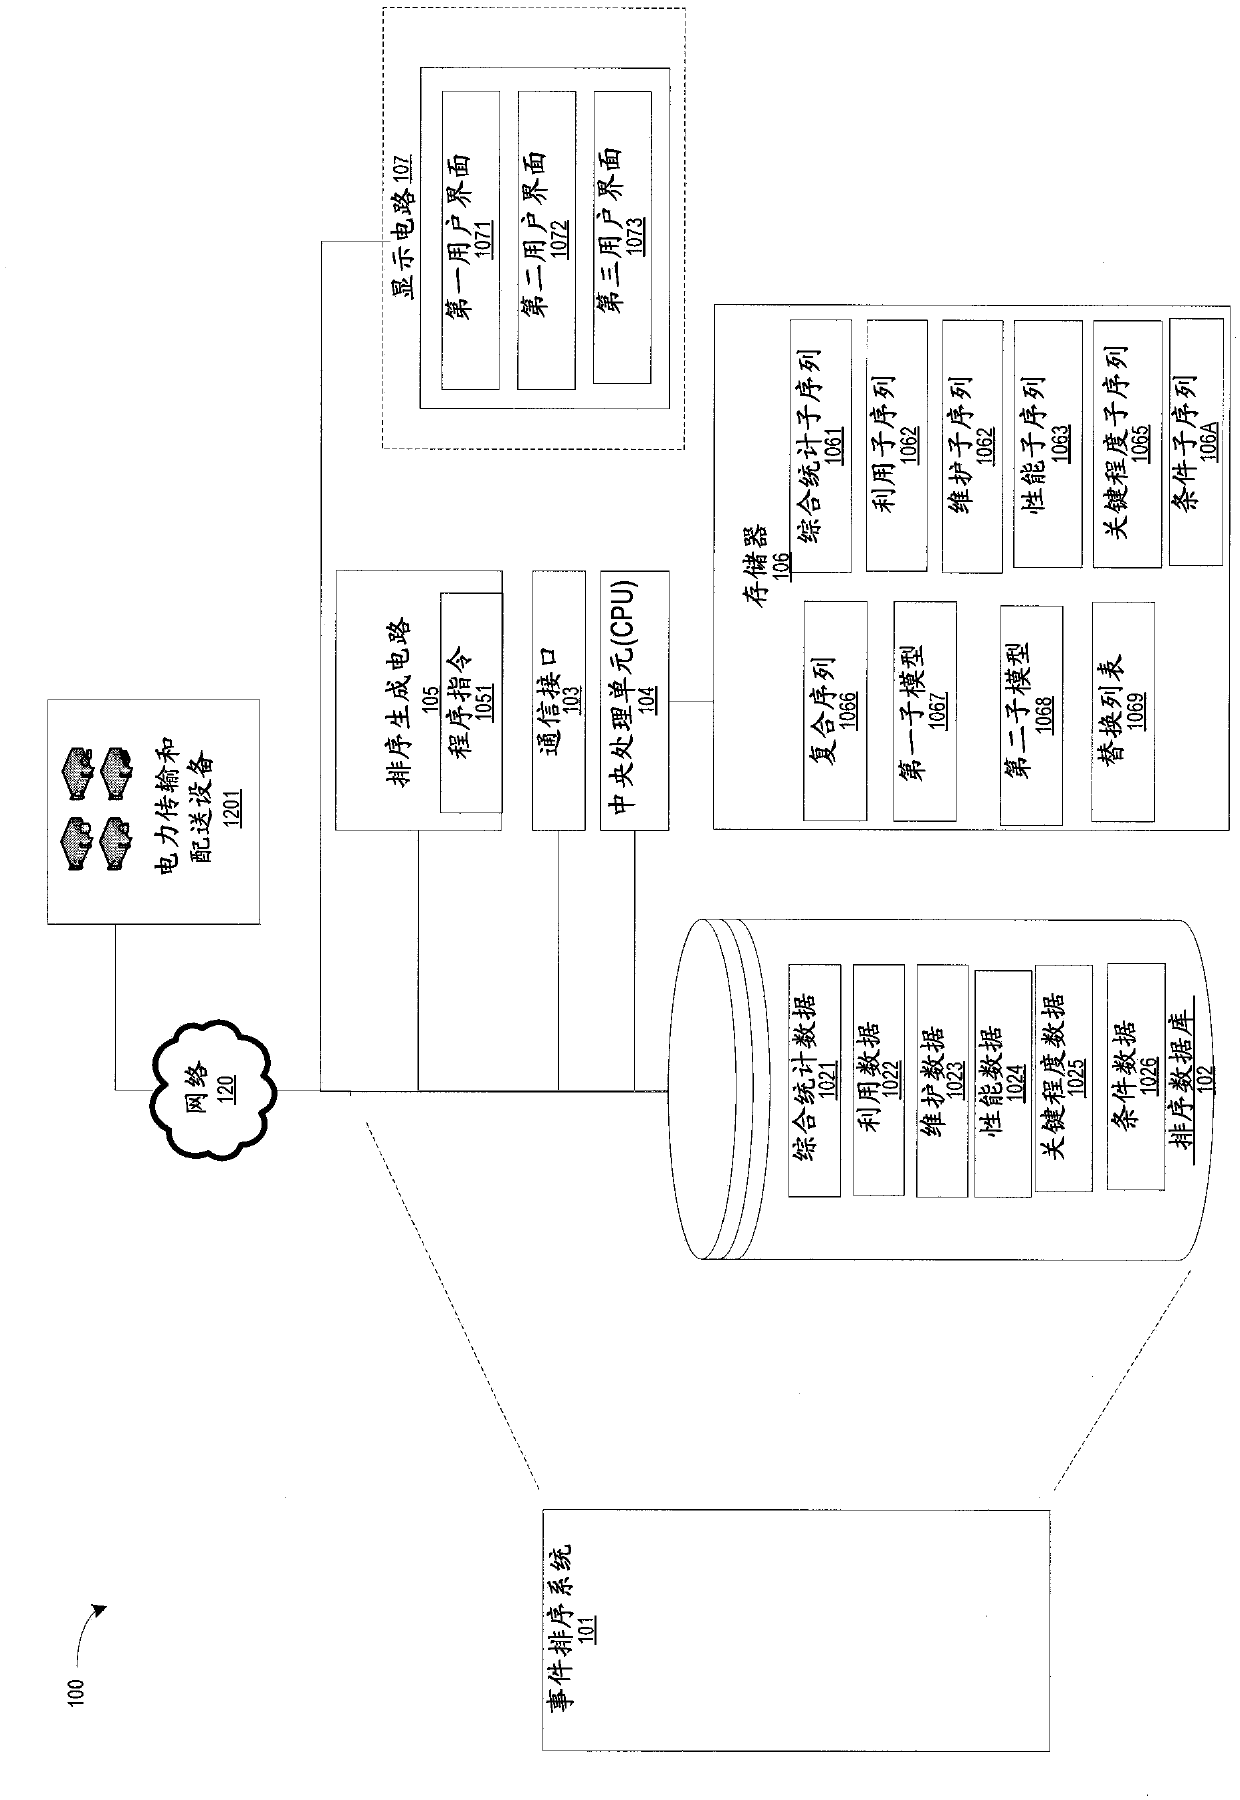 Electrical power transmission and distribution equipment event sequencing system